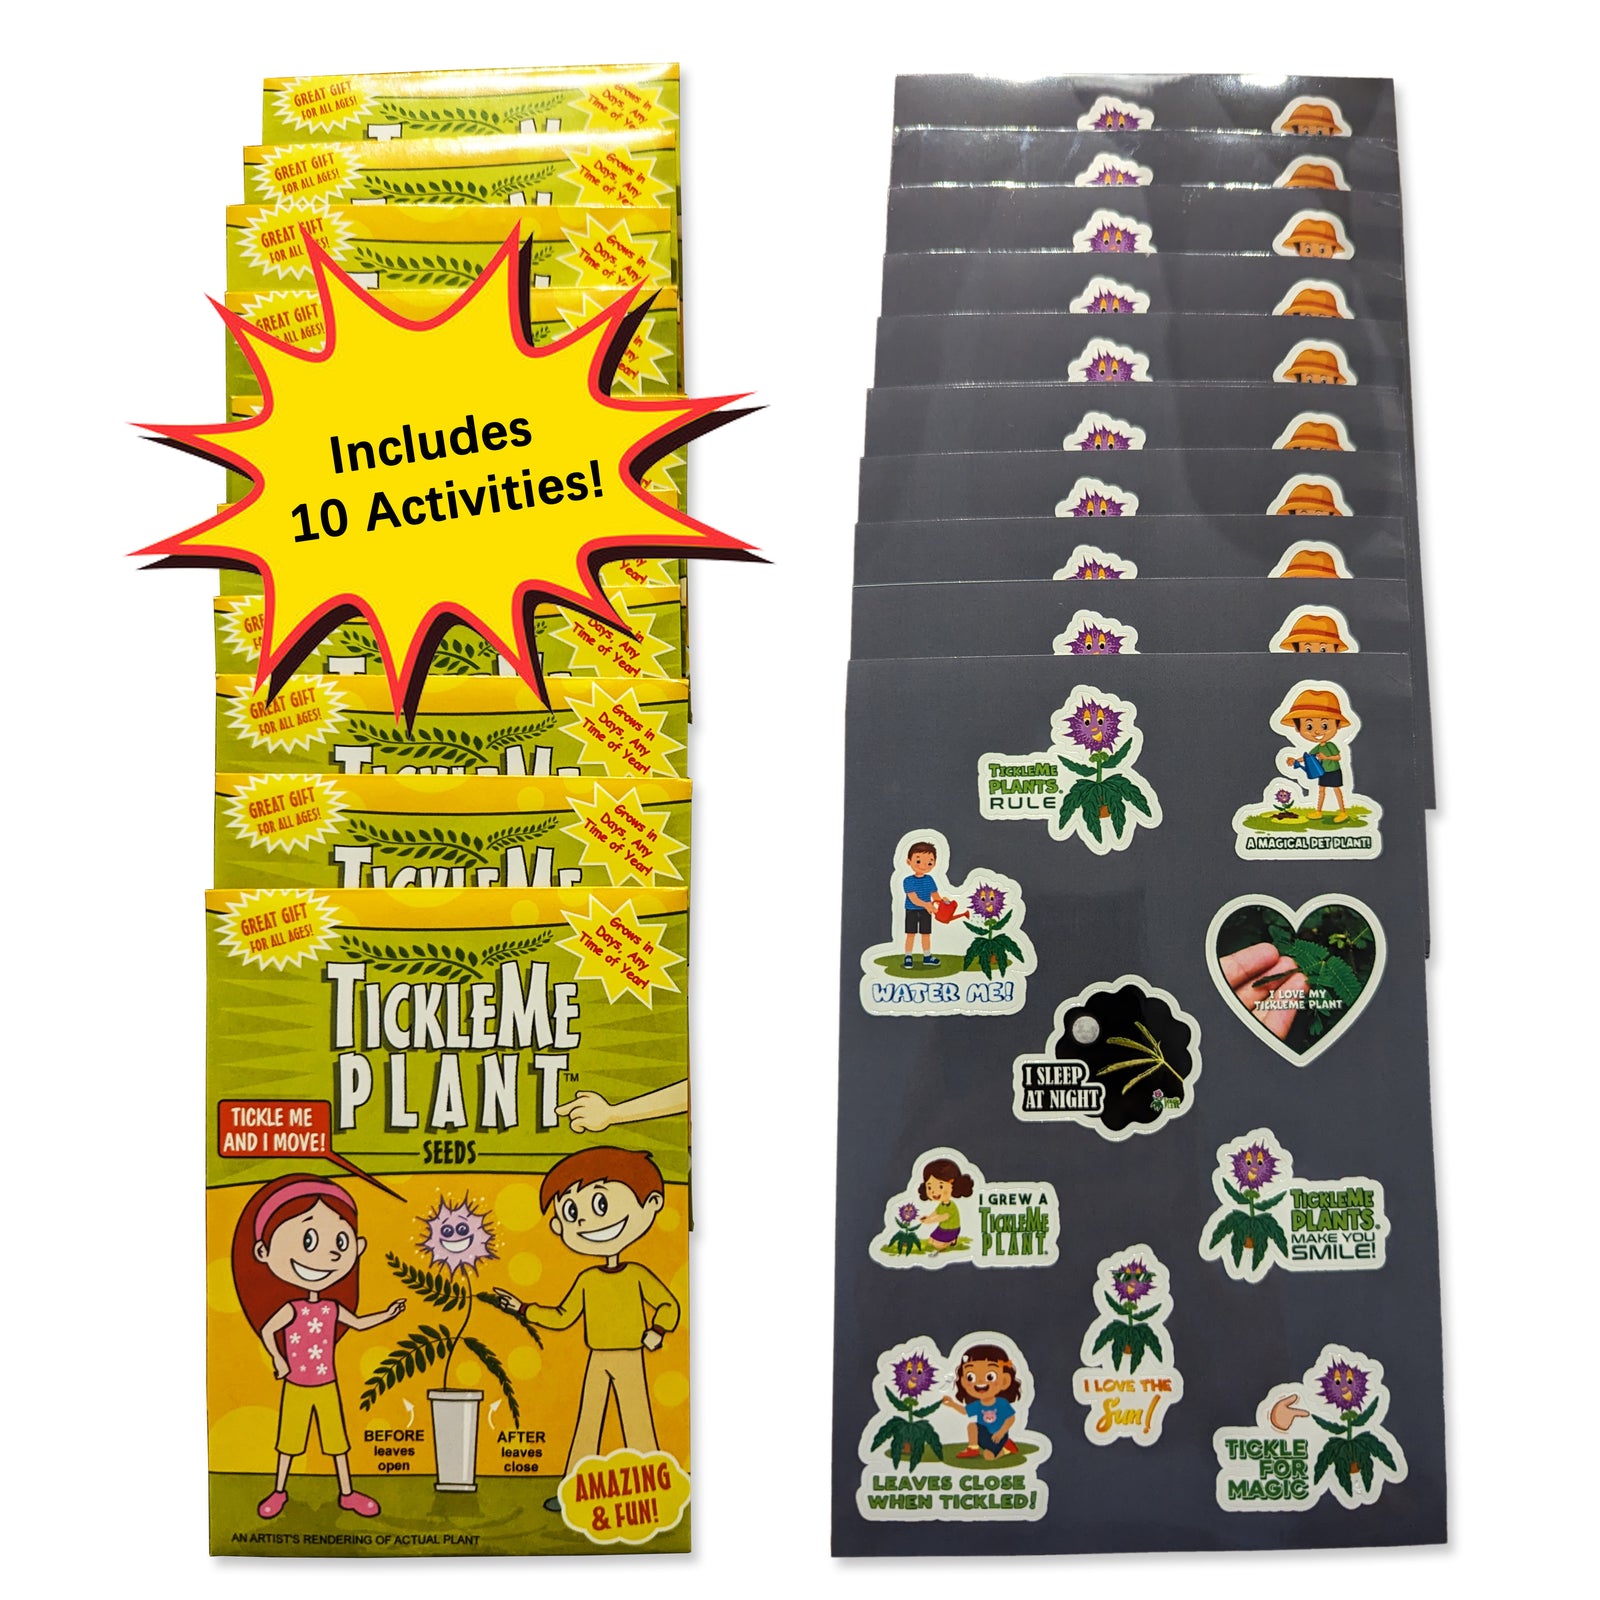 TickleMe Plant Seed Packets Bulk Party Pack (10) + 10 Free Sticker Sheets. Share Your Love of The TickleMe Plant. Grow a Real House Plant That Moves When Tickled!